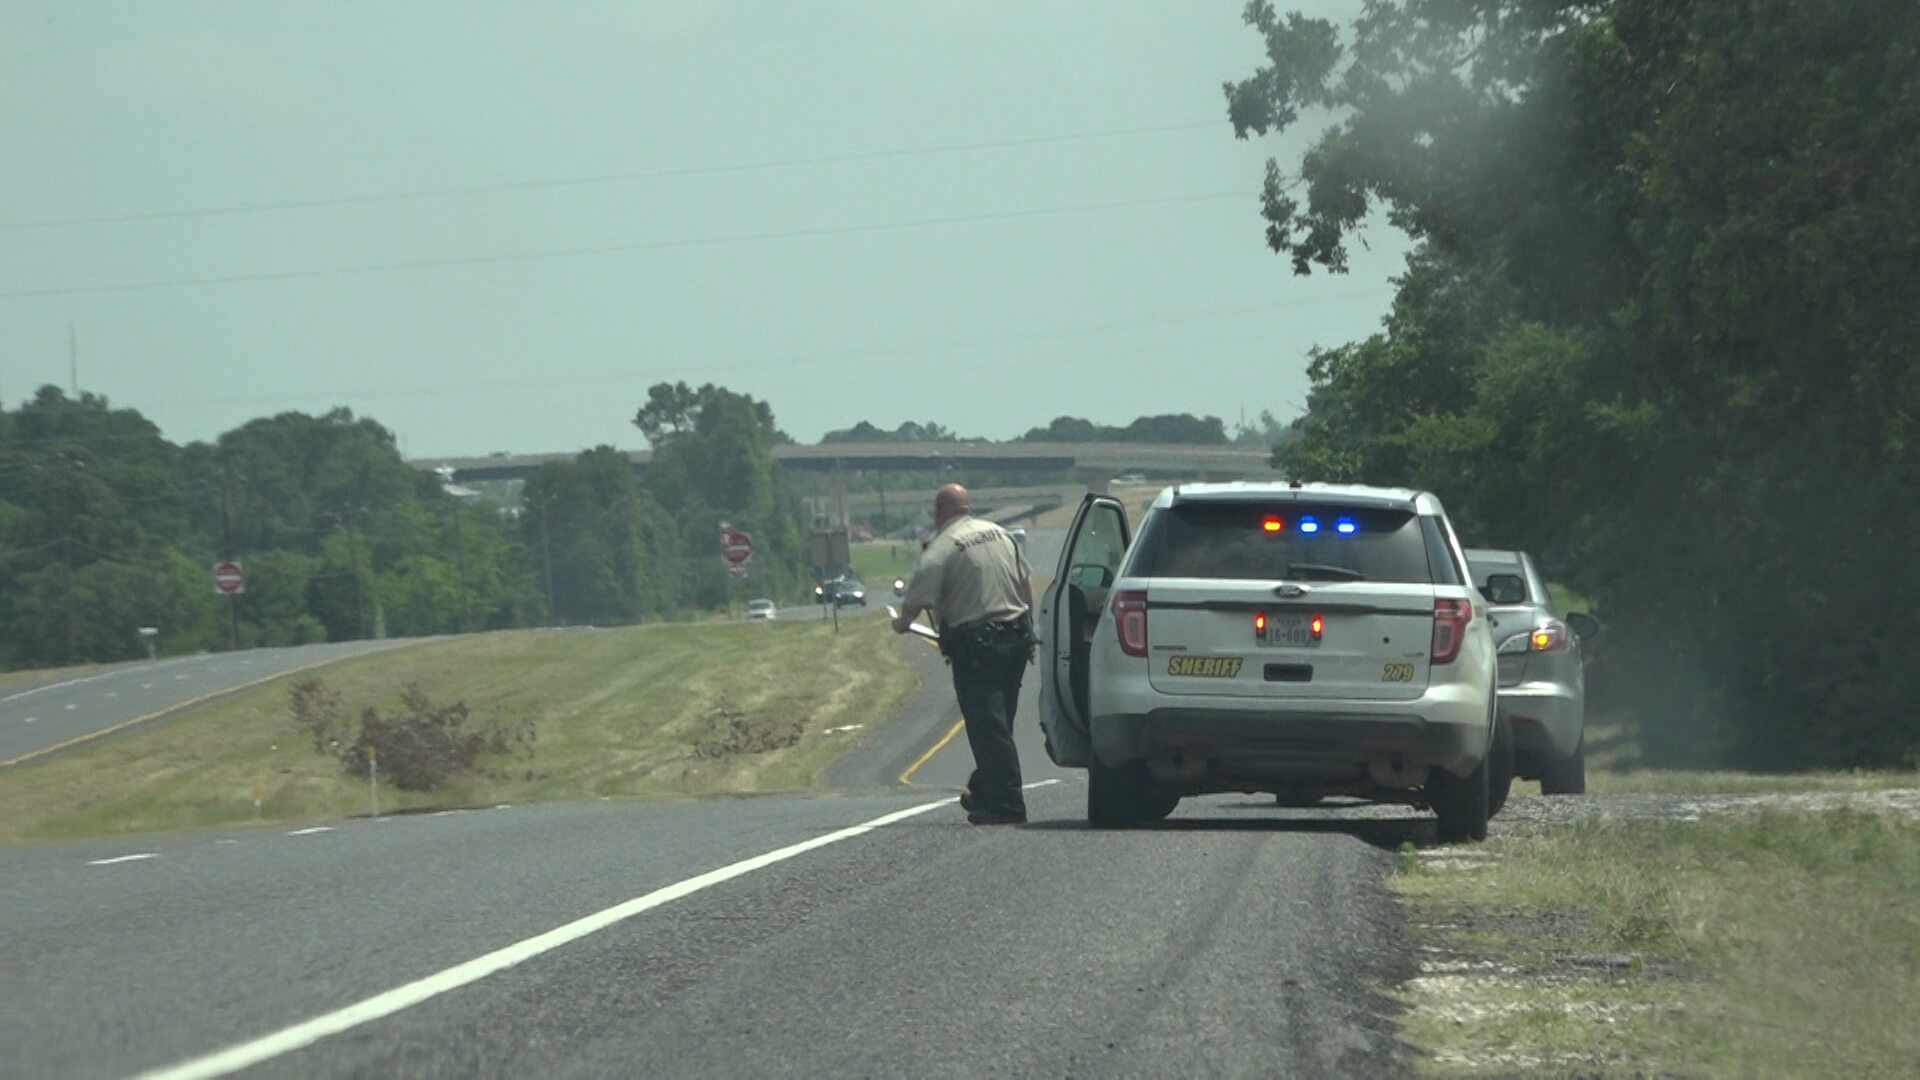 LAW ENFORCEMENT TACKLE SLOW DOWN MOVE OVER LAW BREAKERS